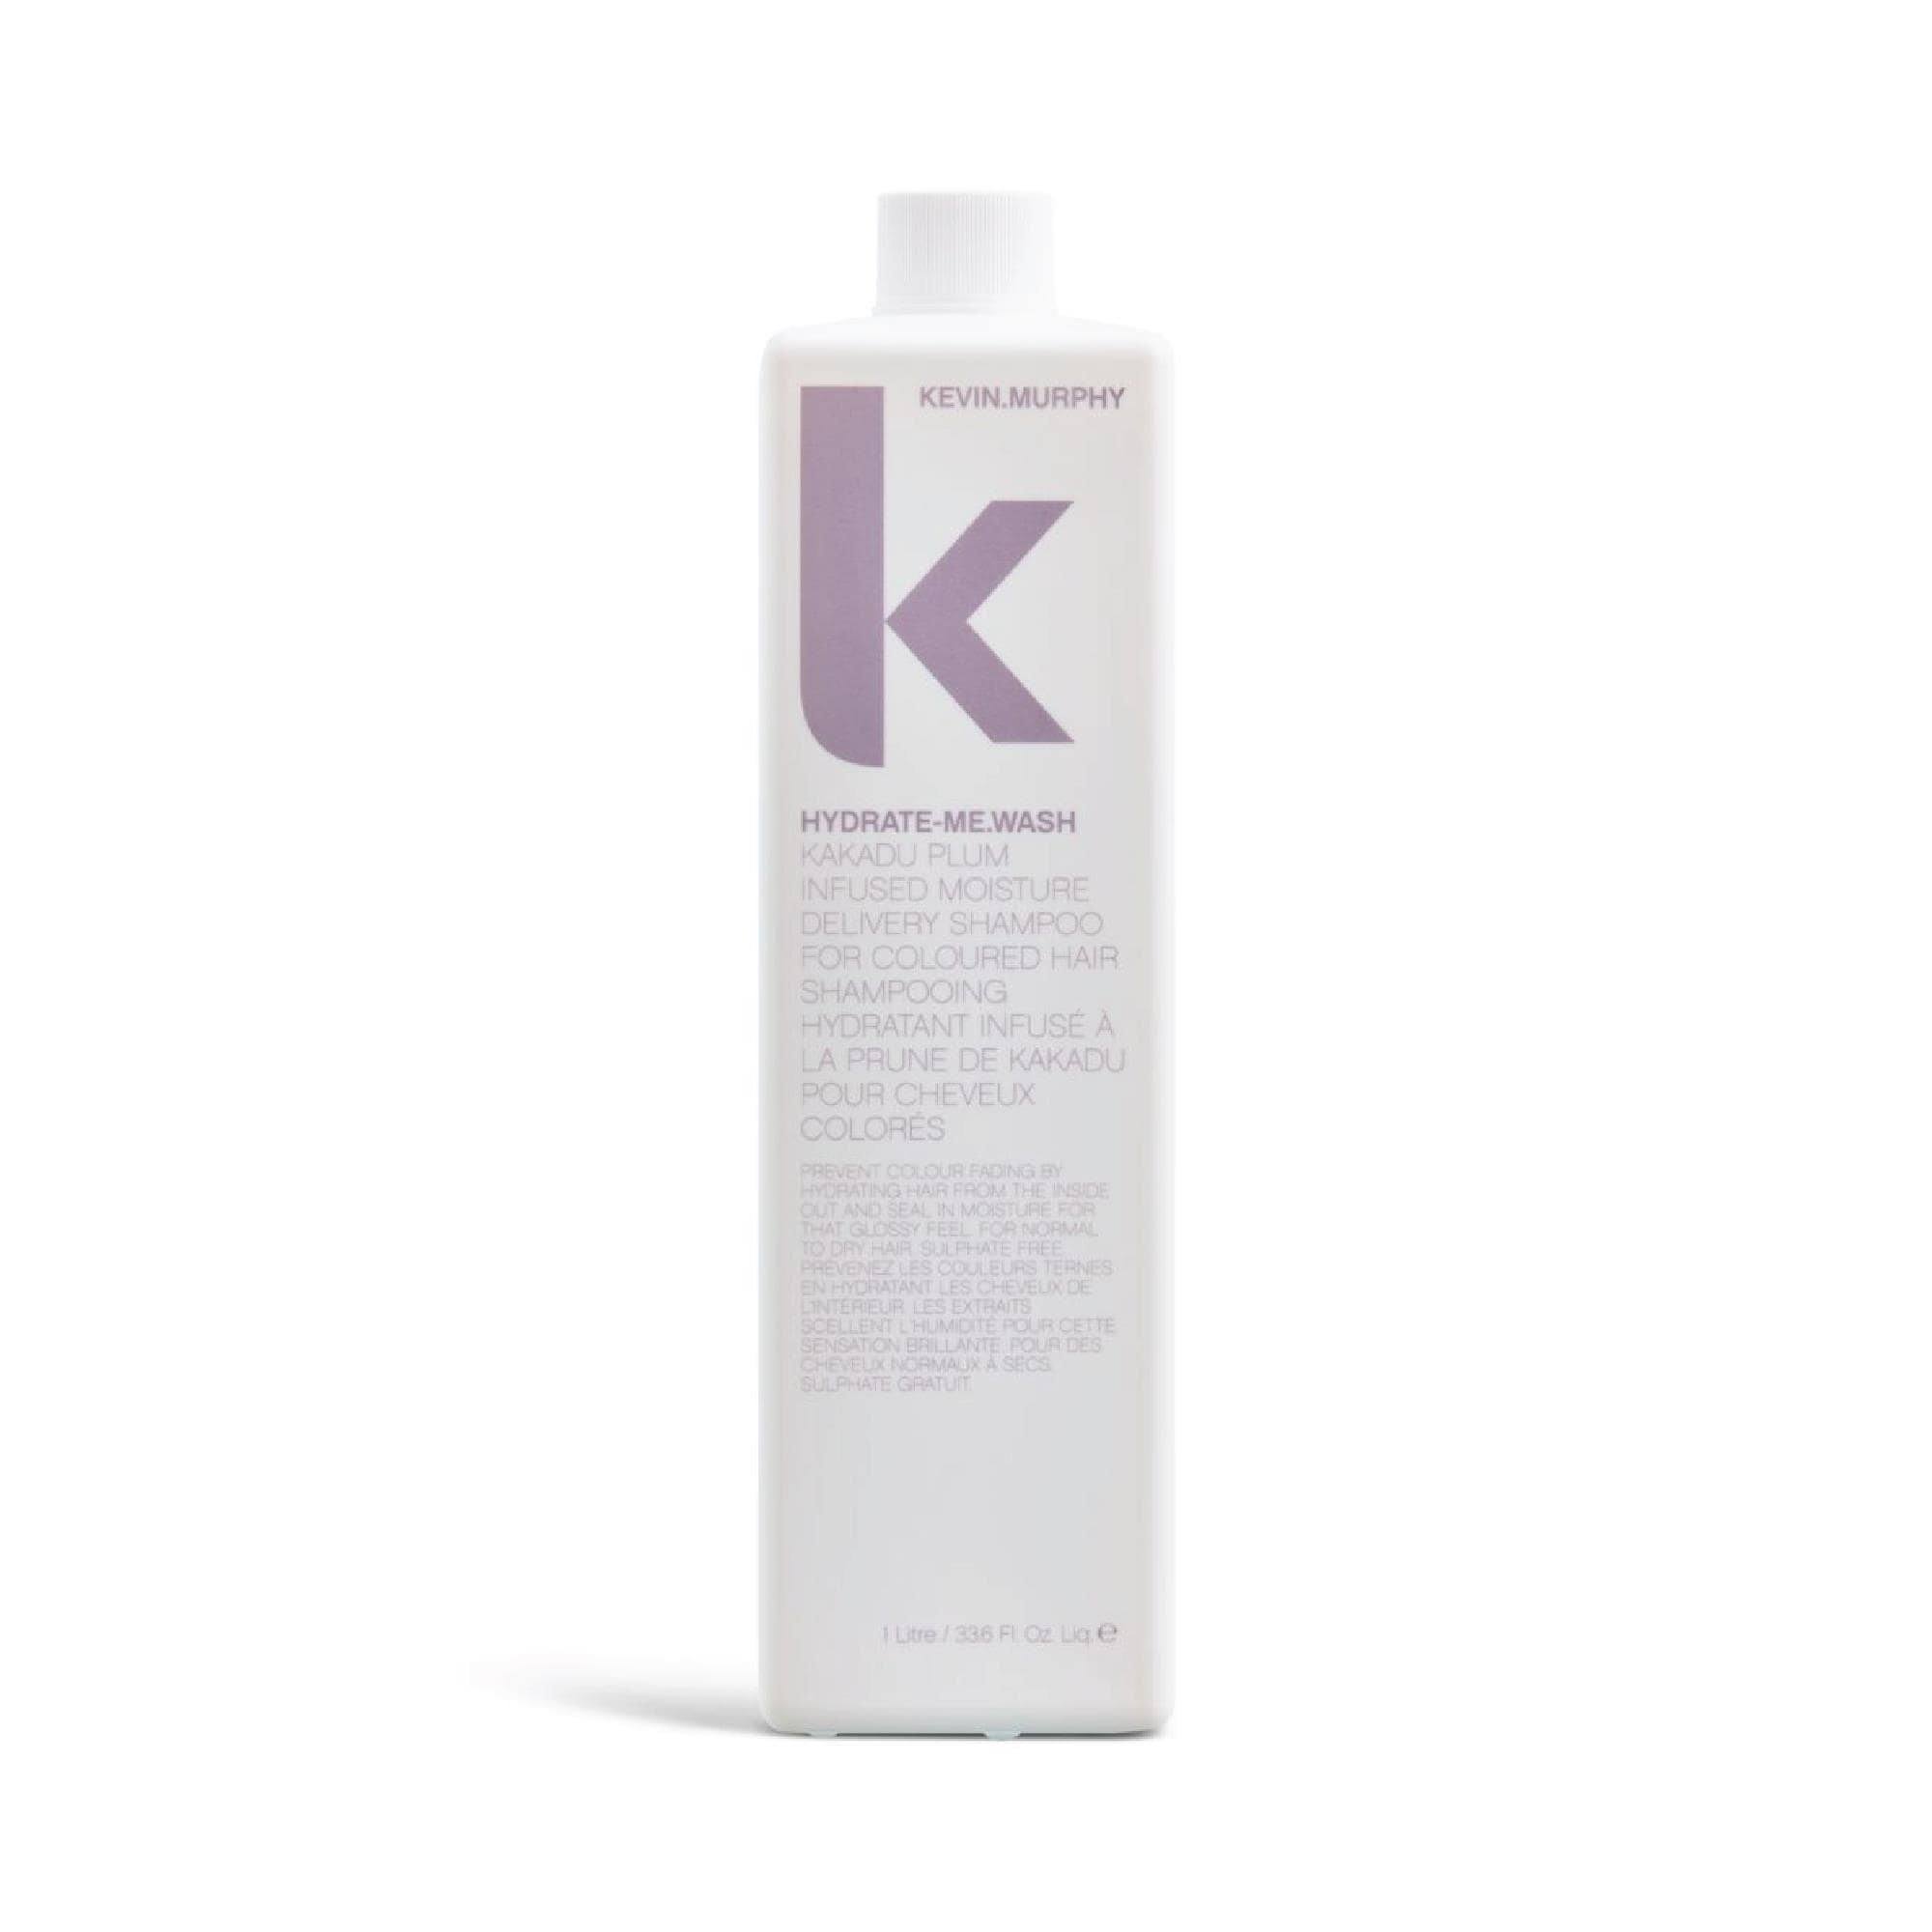 Kevin Murphy Hydrate Me Wash 1 Litre